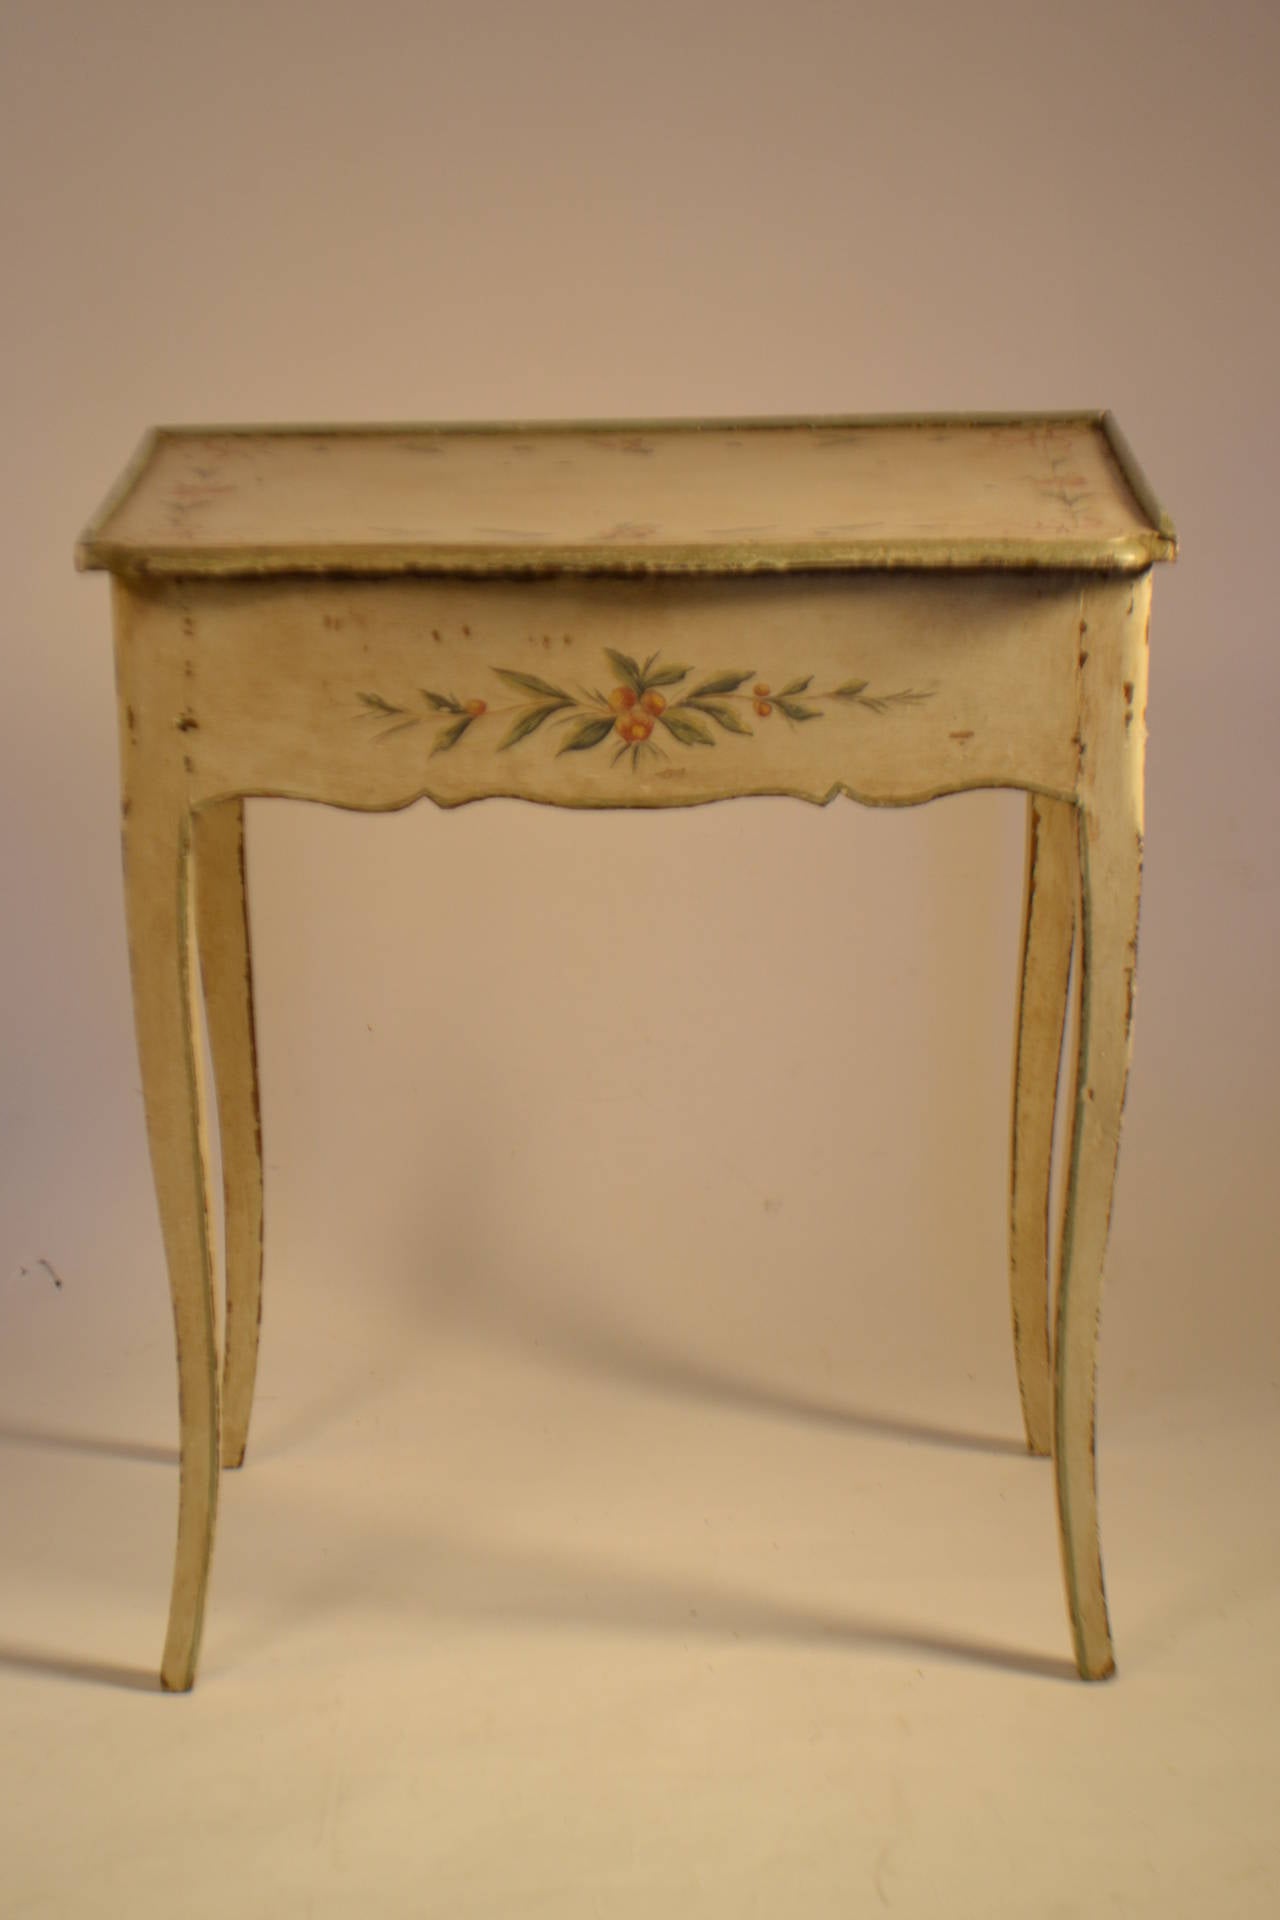 Exquisite Louis XV Period Dressing table with creme peinte, and an olive green border. The flip top opens to a flower motif padded interior which holds brass and glass perfume bottles and jars.  There are several compartments for all kinds of